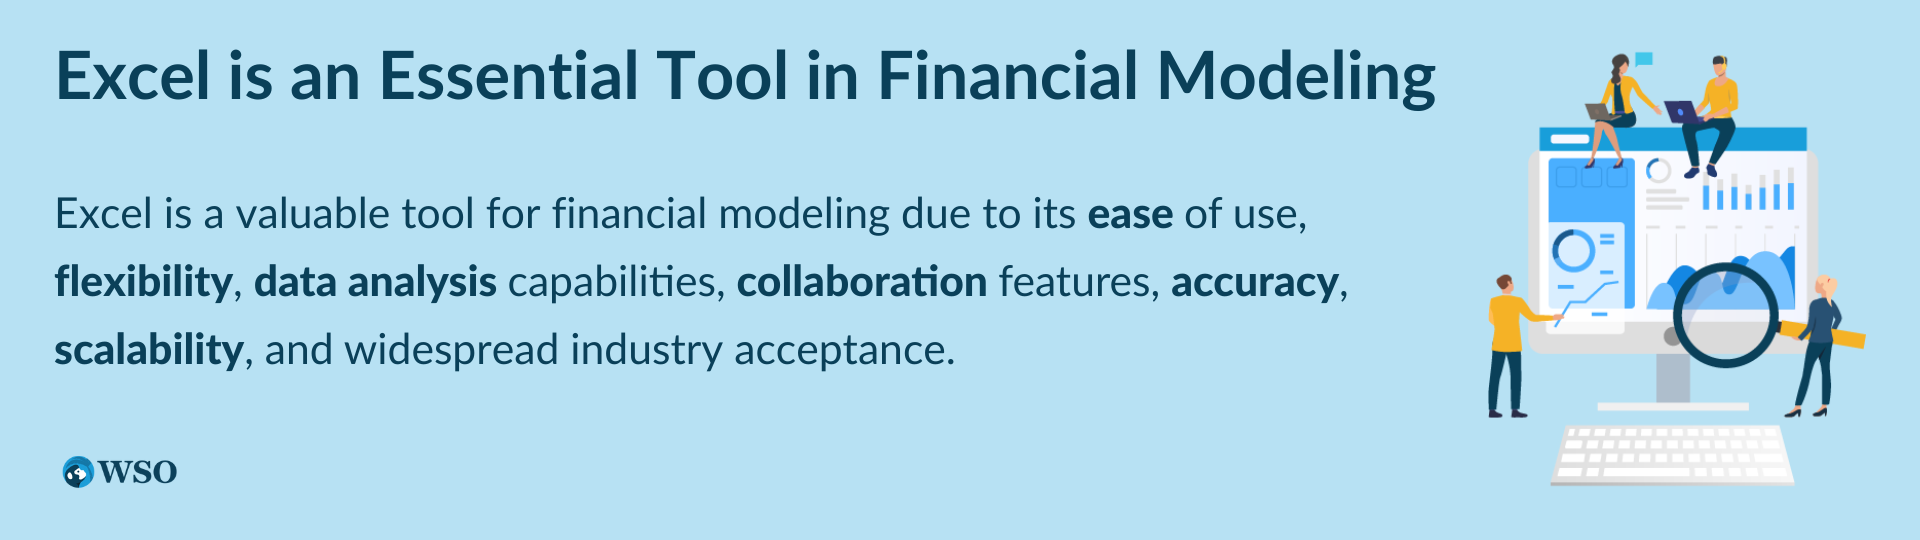 Excel is an Essential Tool in Financial Modeling